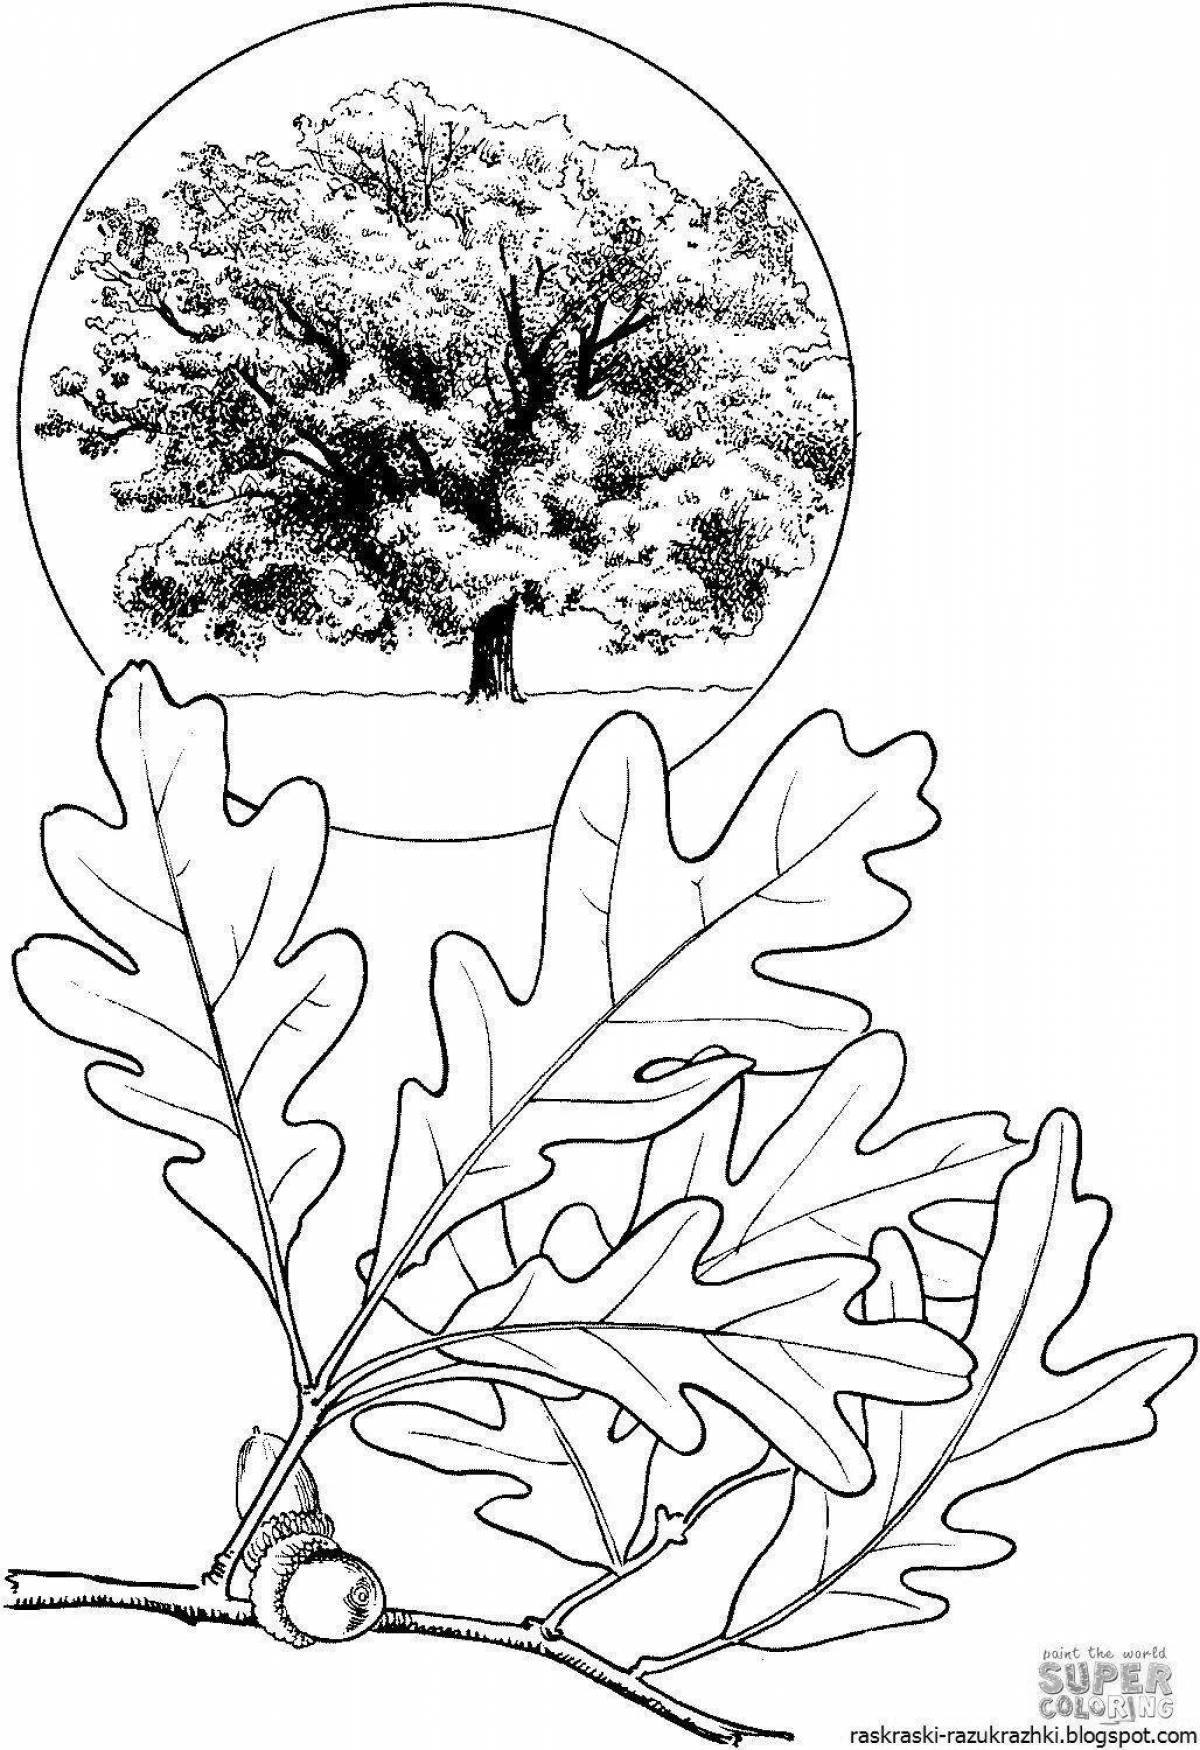 Coloring book happy oak tree for kids